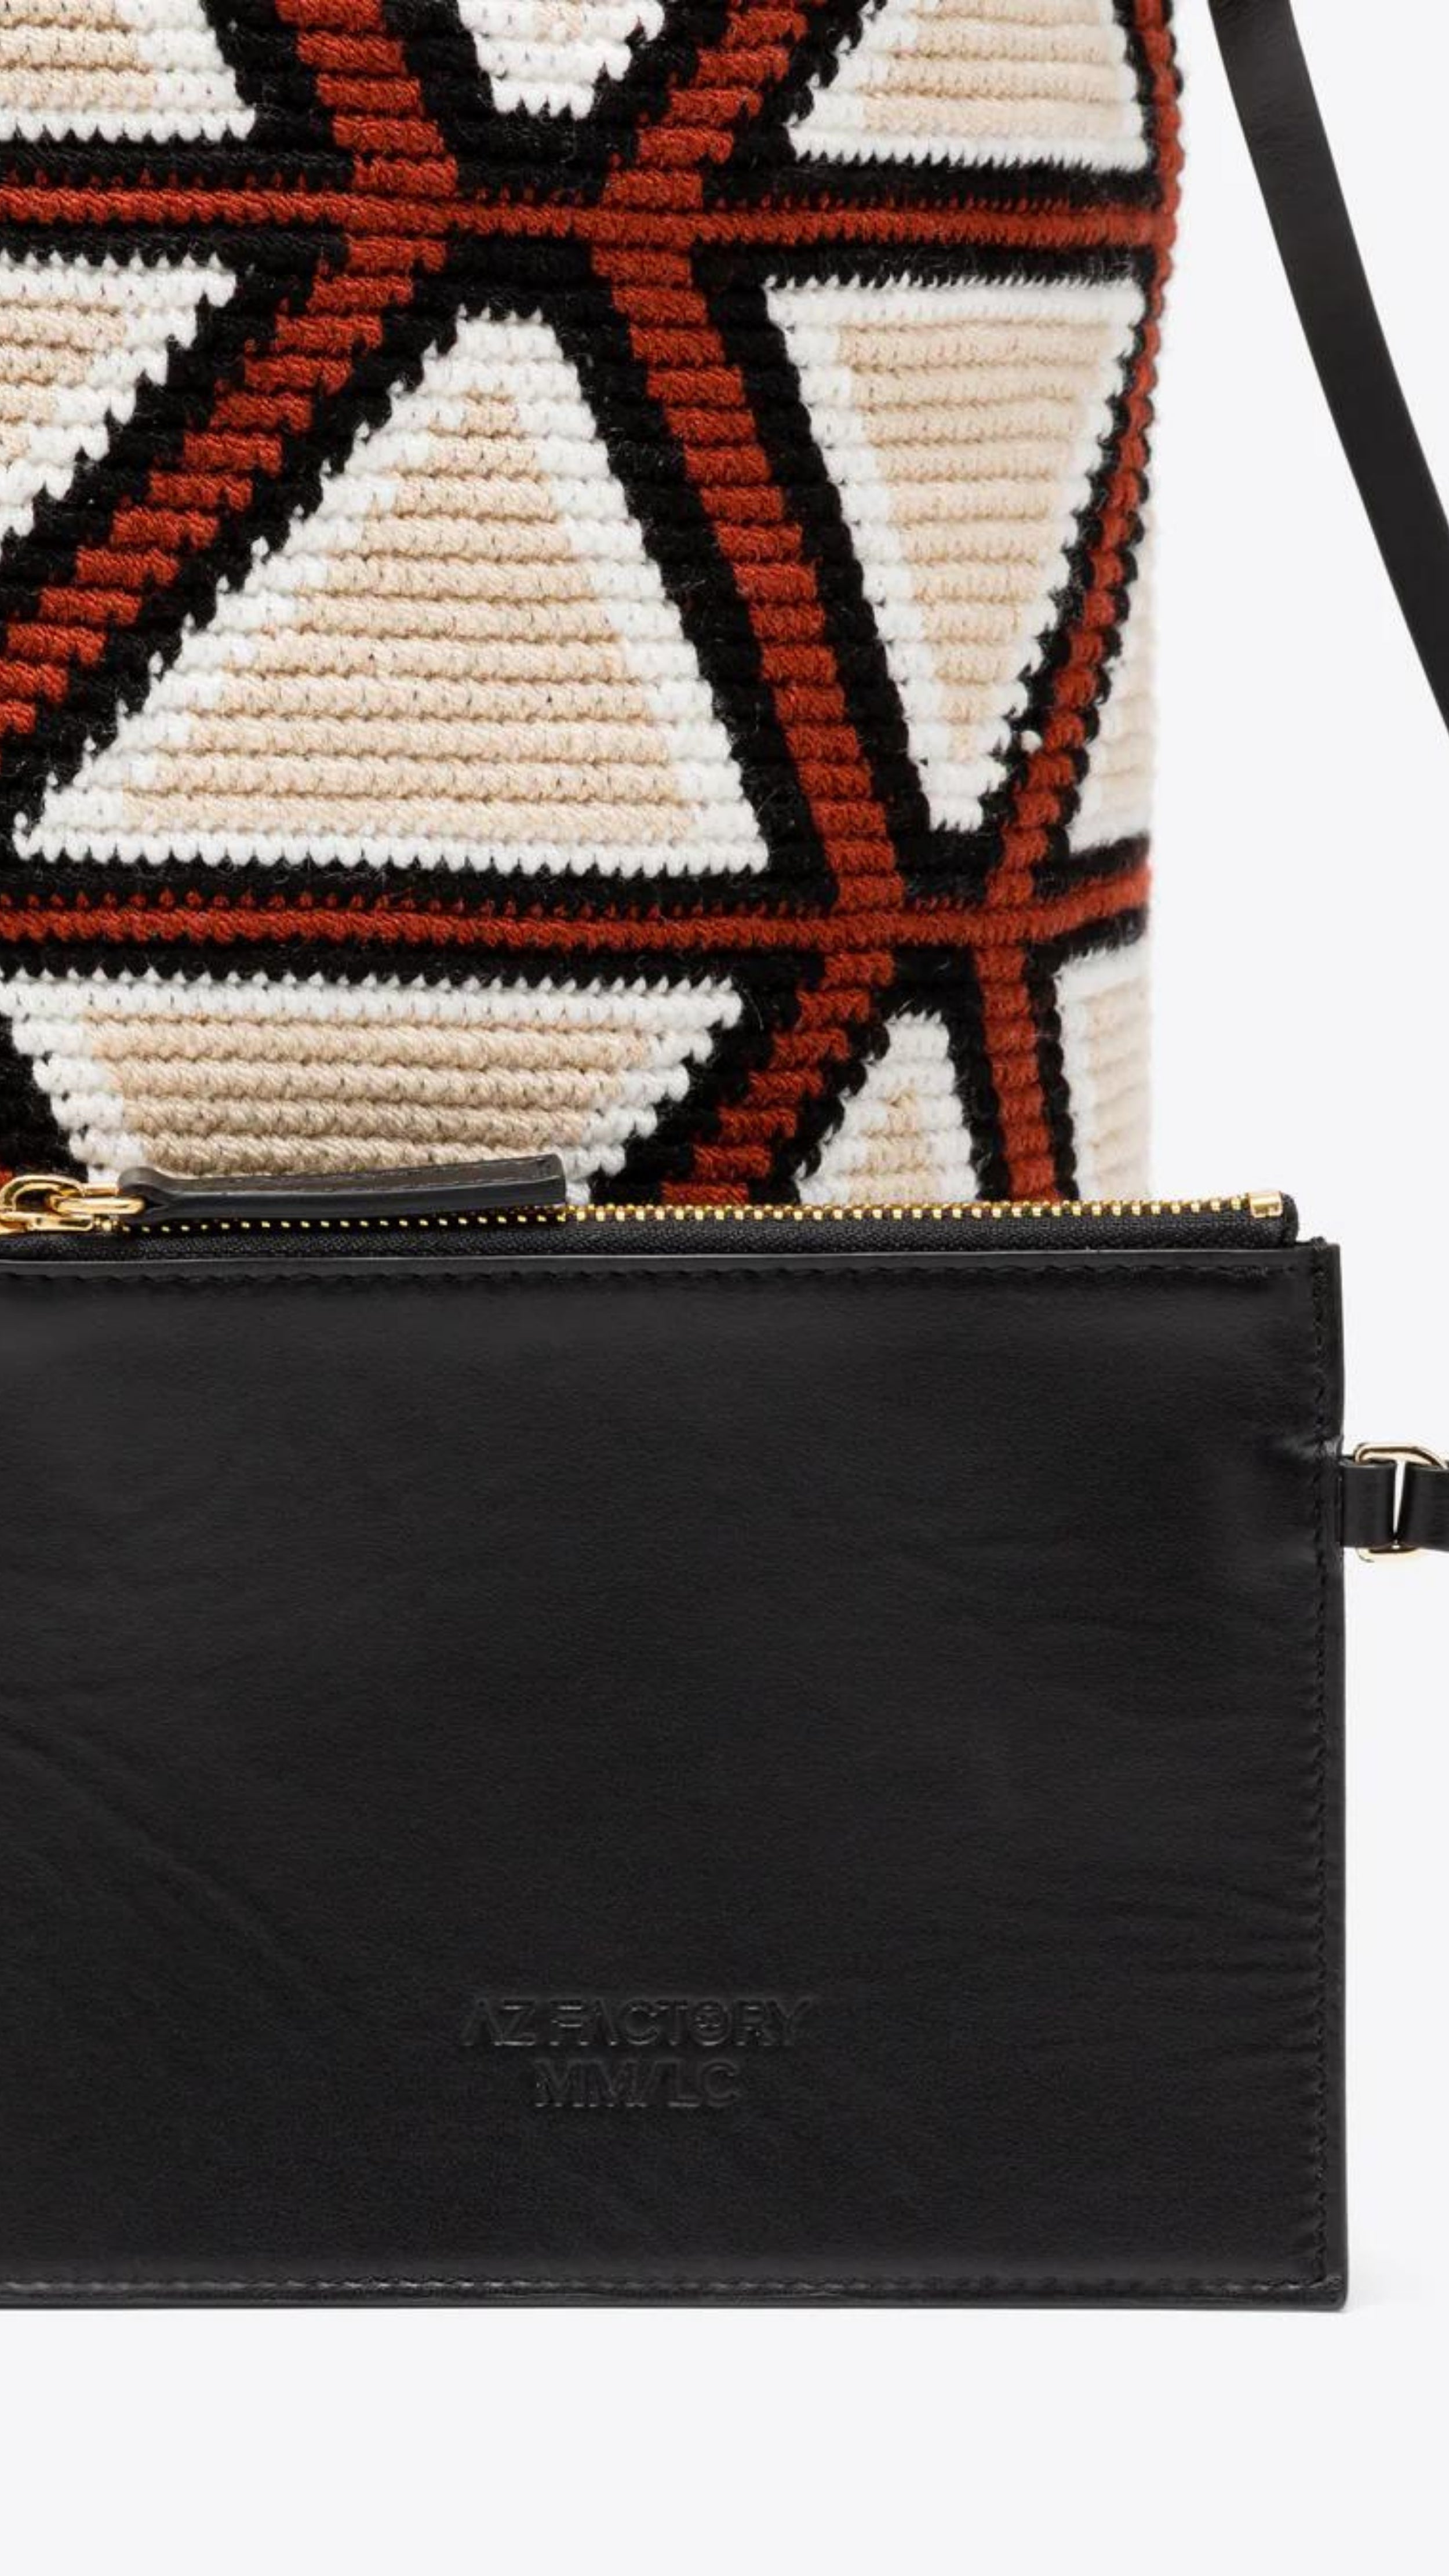 AZ Factory Colville Molly Molloy Lucinda Chambers, WOVEN CABRAS BAG  The Cabras Bag is woven in Wayuu Colombian and finished with Italian leather craftsmanship. Its ecru and burgundy diamond pattern is enhanced with black leather trim and a long black tassel. Shown with the interior leather pouch.